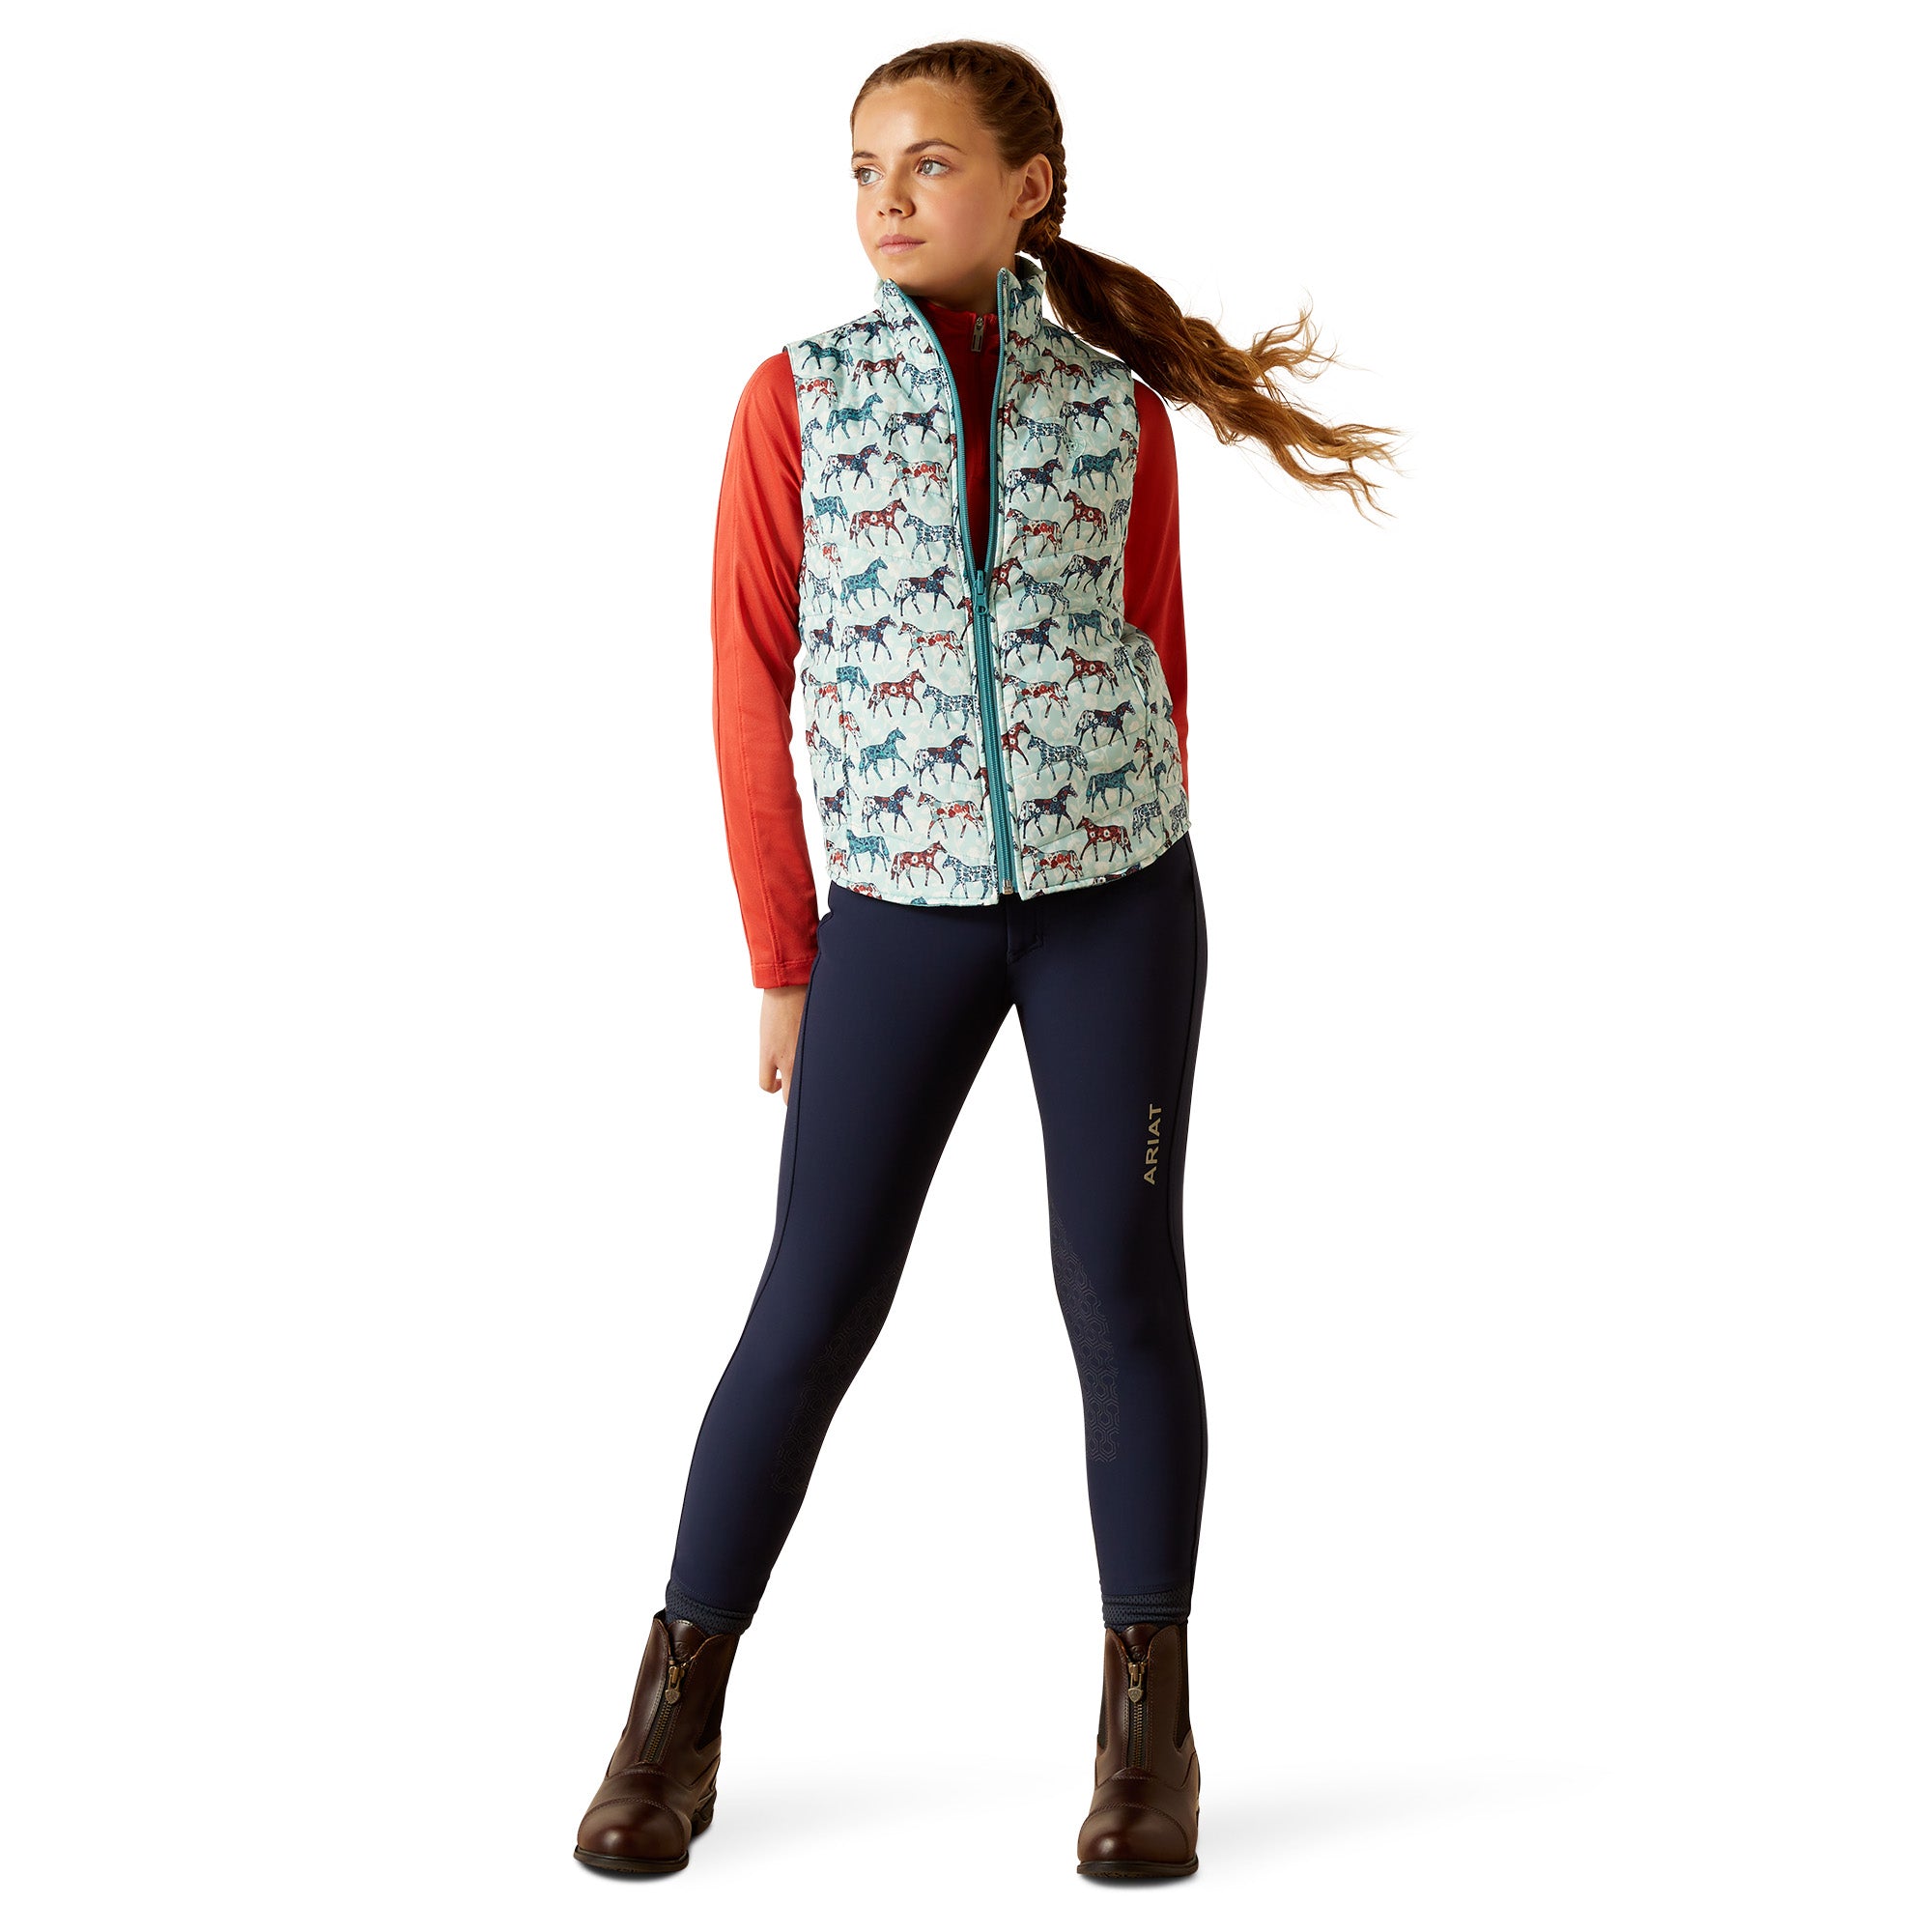 Ariat Yth Bella Ins Reversible Gilet Pns/Brittany Blue